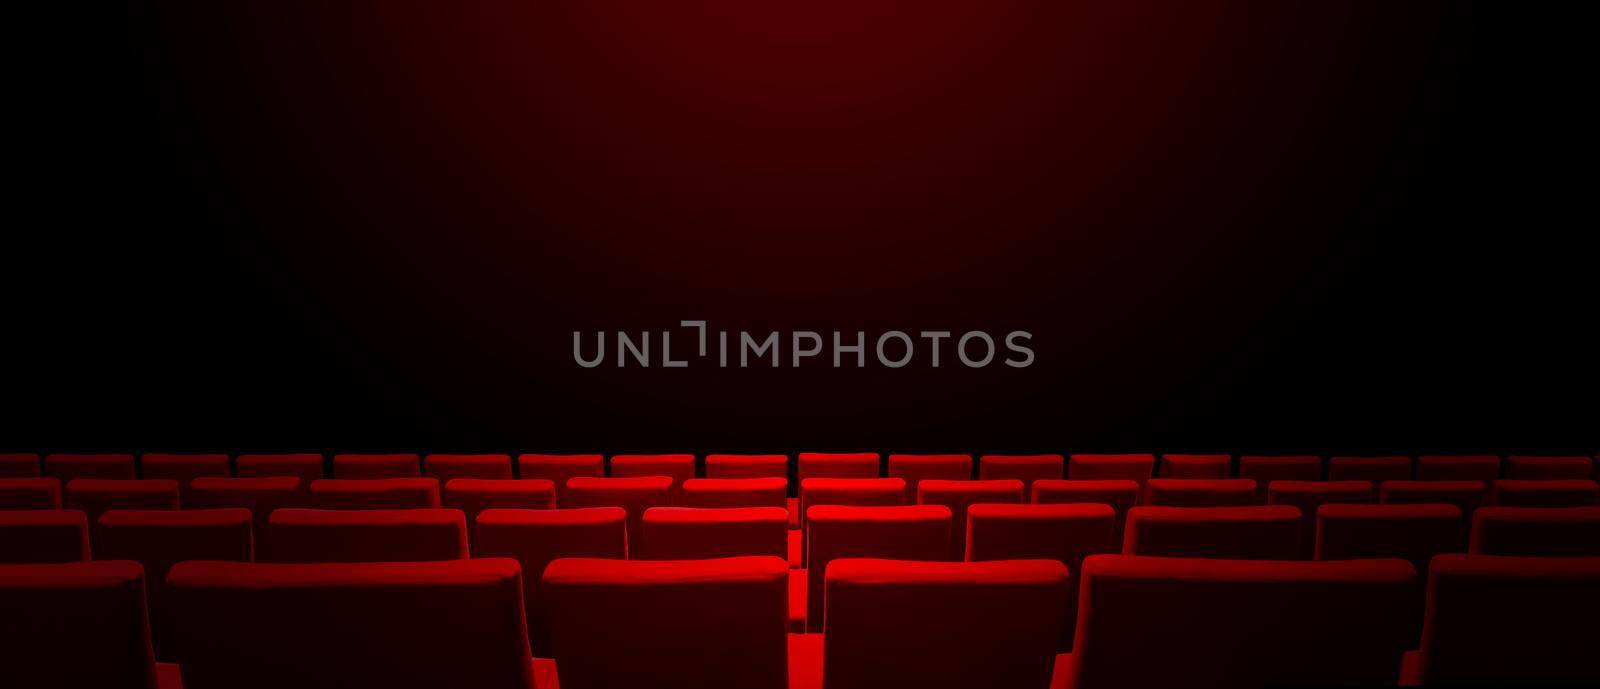 Cinema movie theatre with red seats rows and a black background. Horizontal banner by daboost